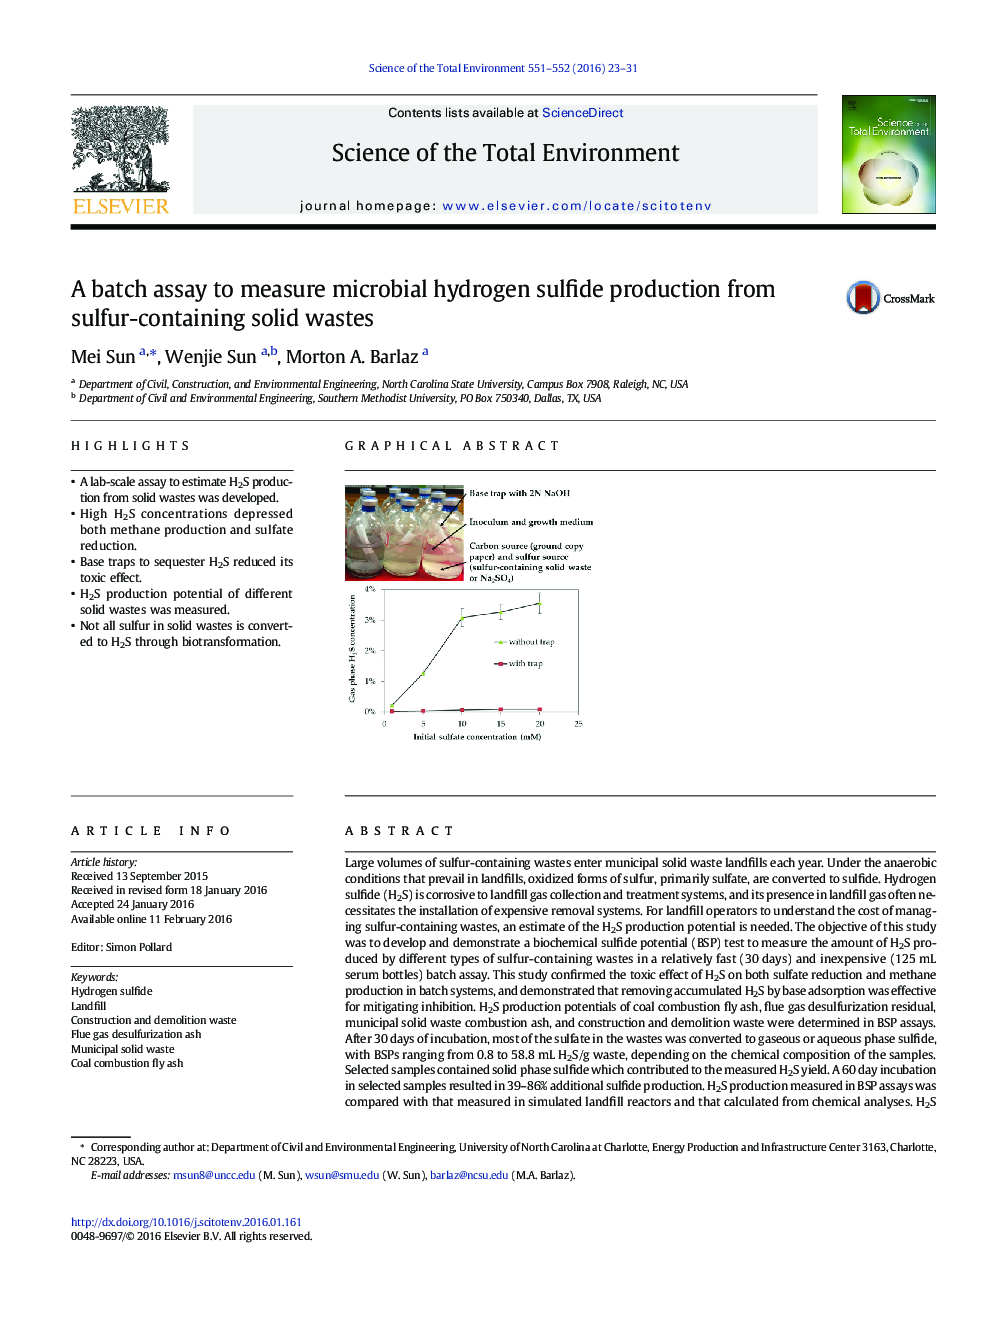 A batch assay to measure microbial hydrogen sulfide production from sulfur-containing solid wastes